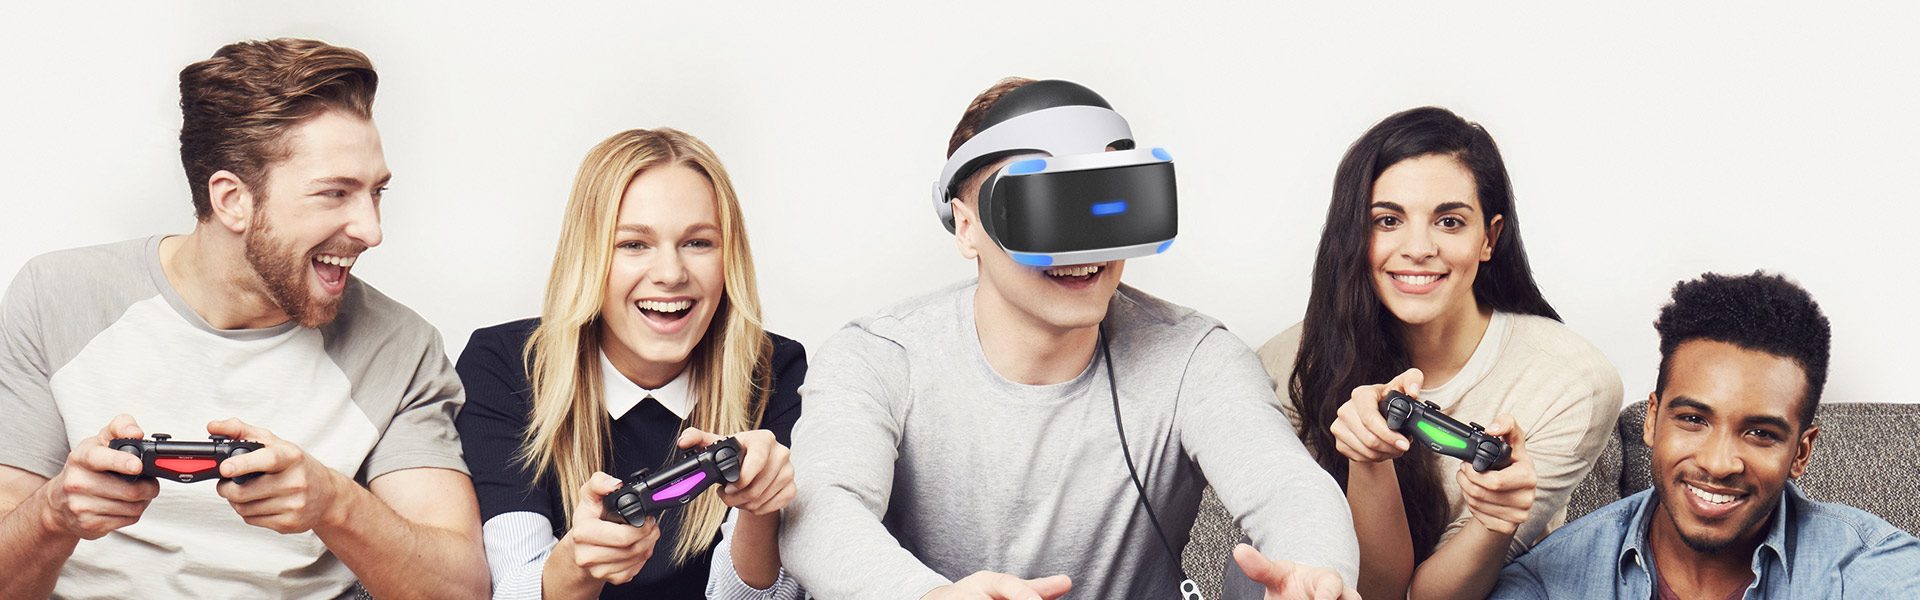 playstation vr by itself